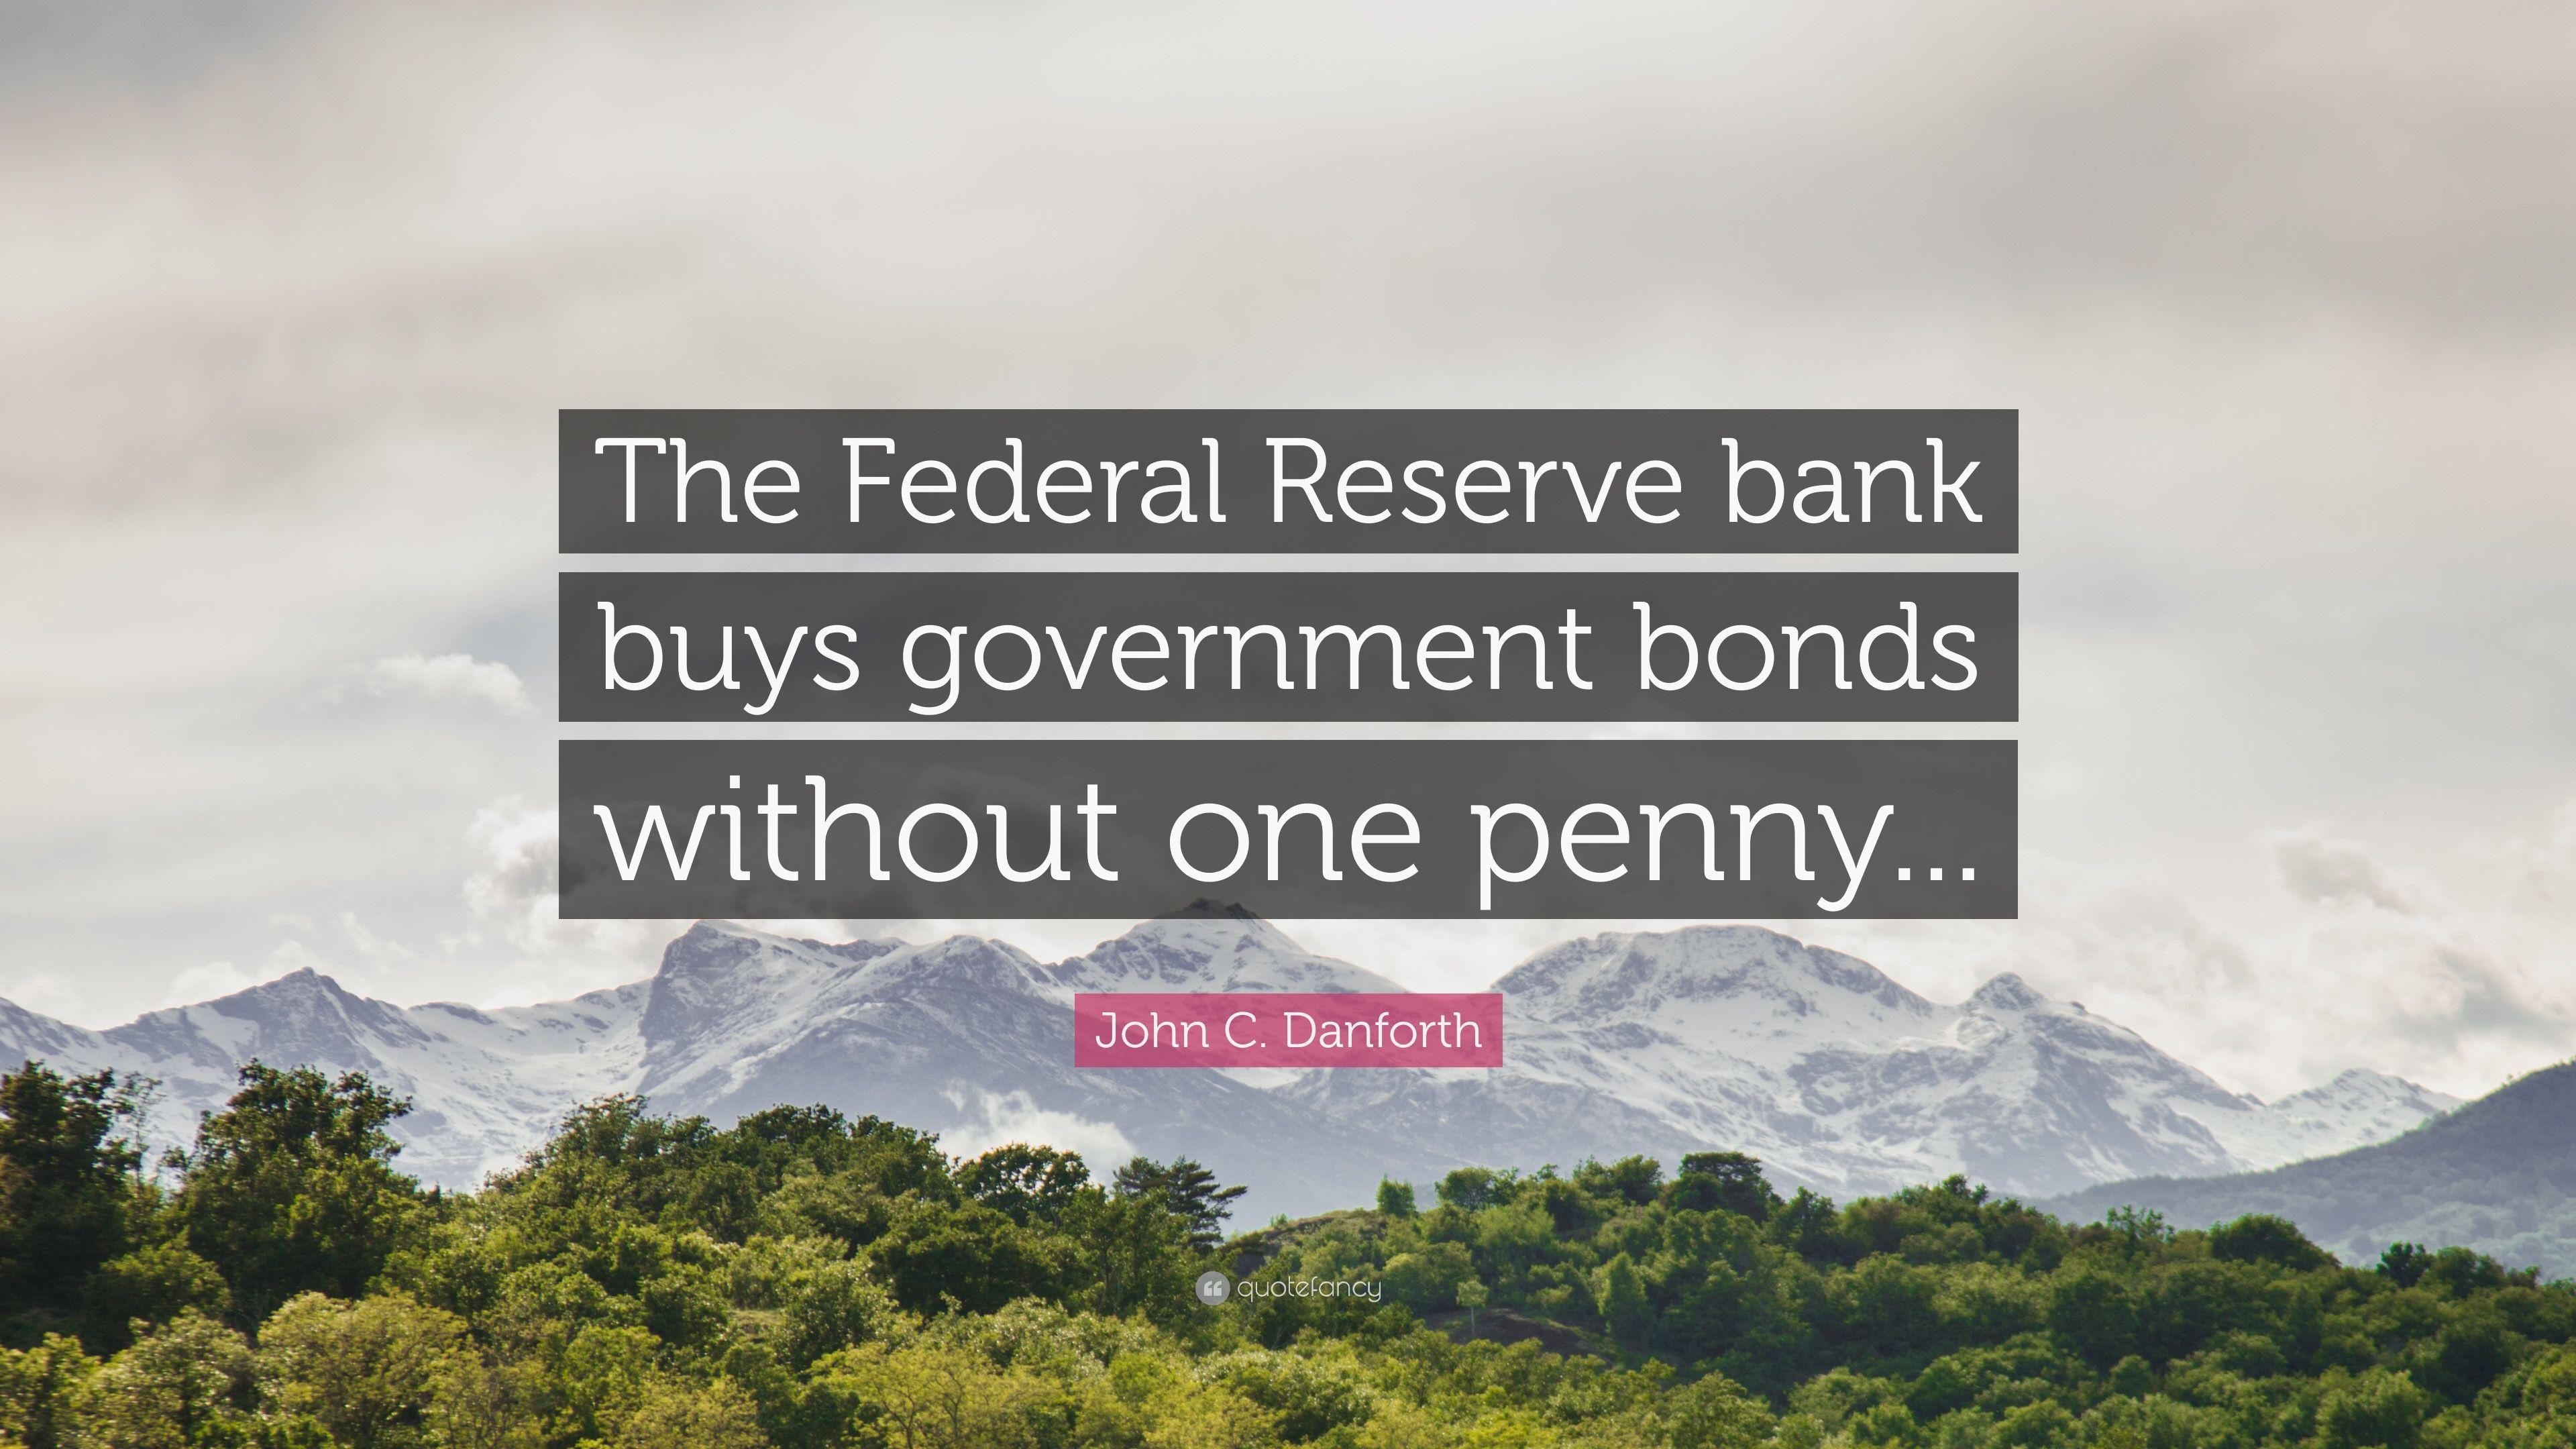 John C. Danforth Quote: “The Federal Reserve bank buys government